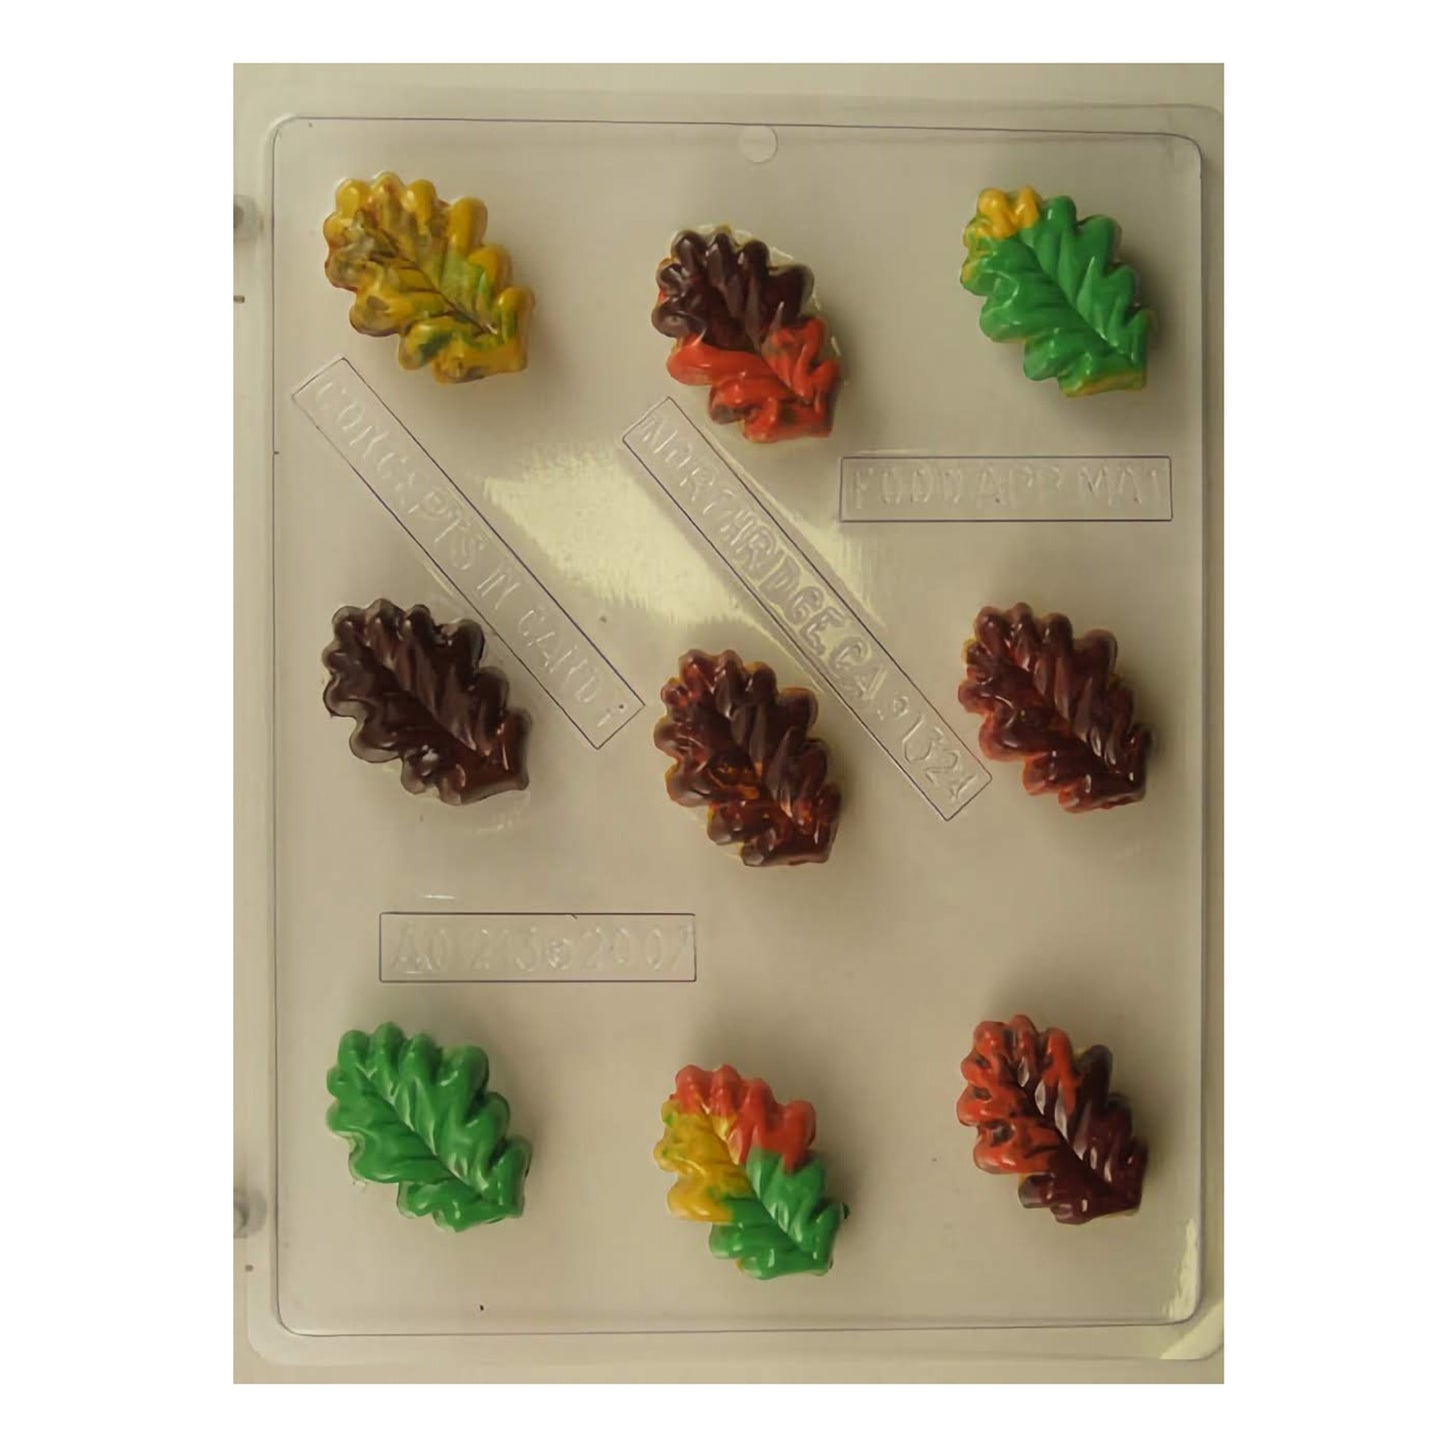 Chocolate mold sheet for creating small oak leaf-shaped confections, with multiple cavities displaying intricately detailed veins of the leaves. The mold includes finished examples in autumnal colors such as yellow, green, red, and brown, emphasizing the seasonal theme of the mold suitable for fall festivities and decorations.